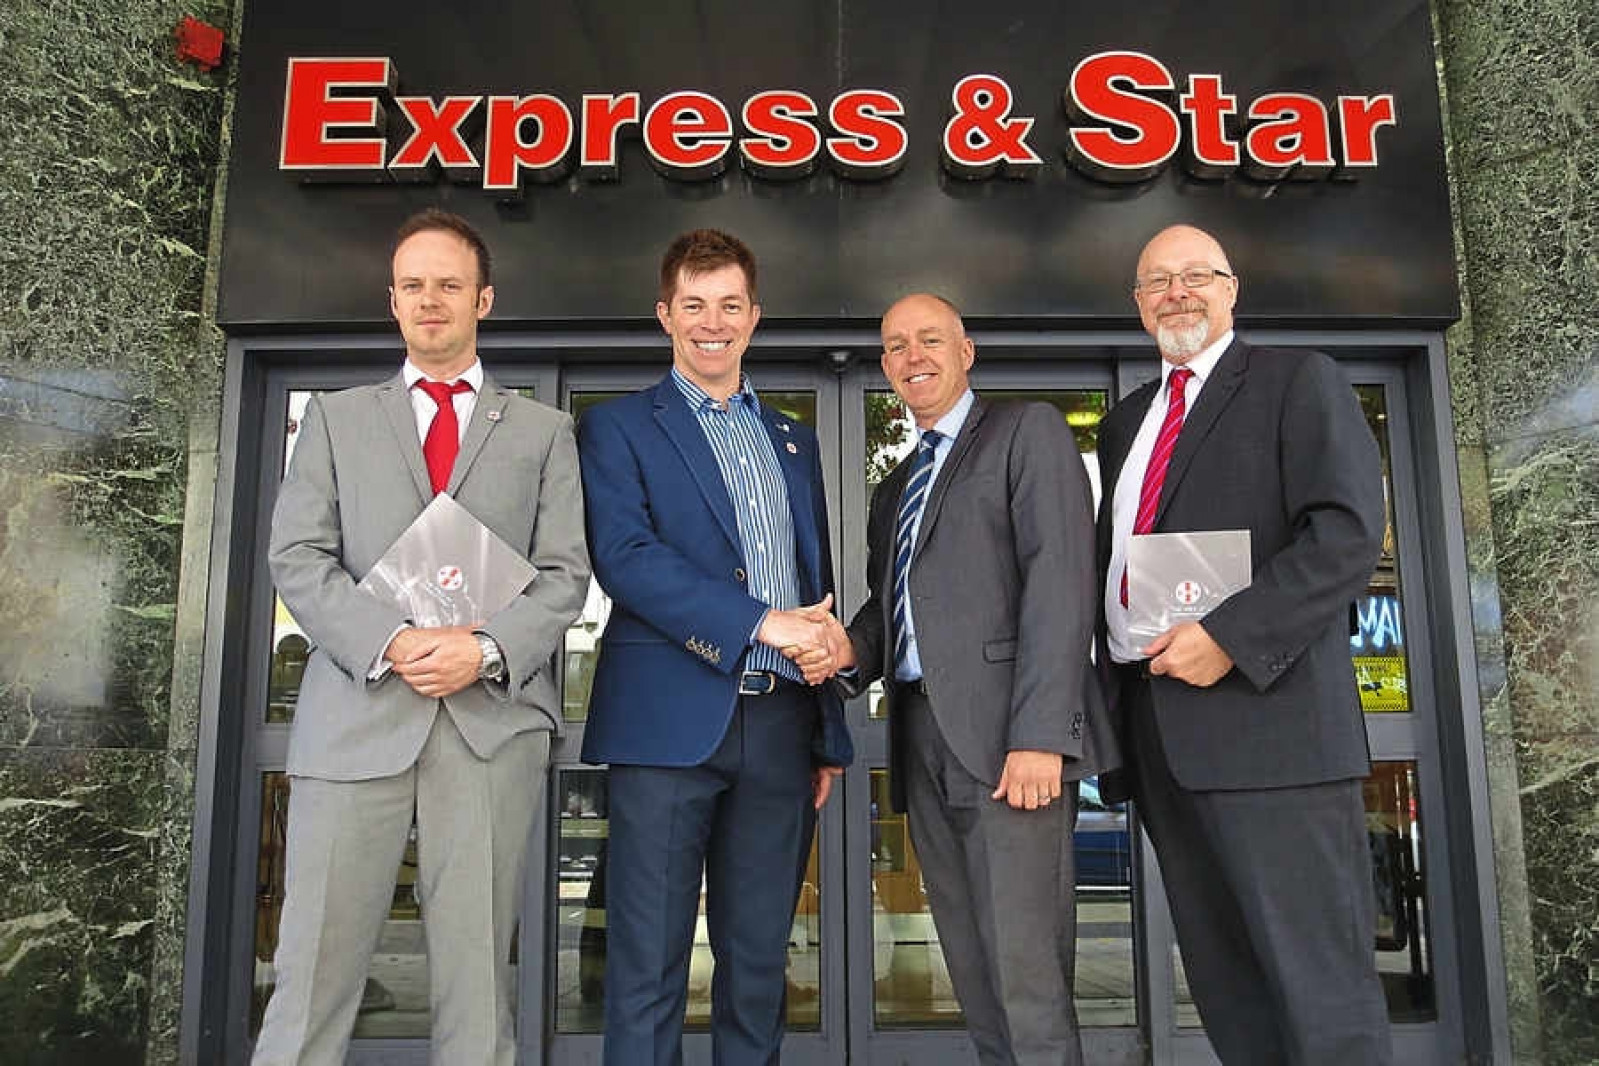 Made in the Midlands links up with Express & Star